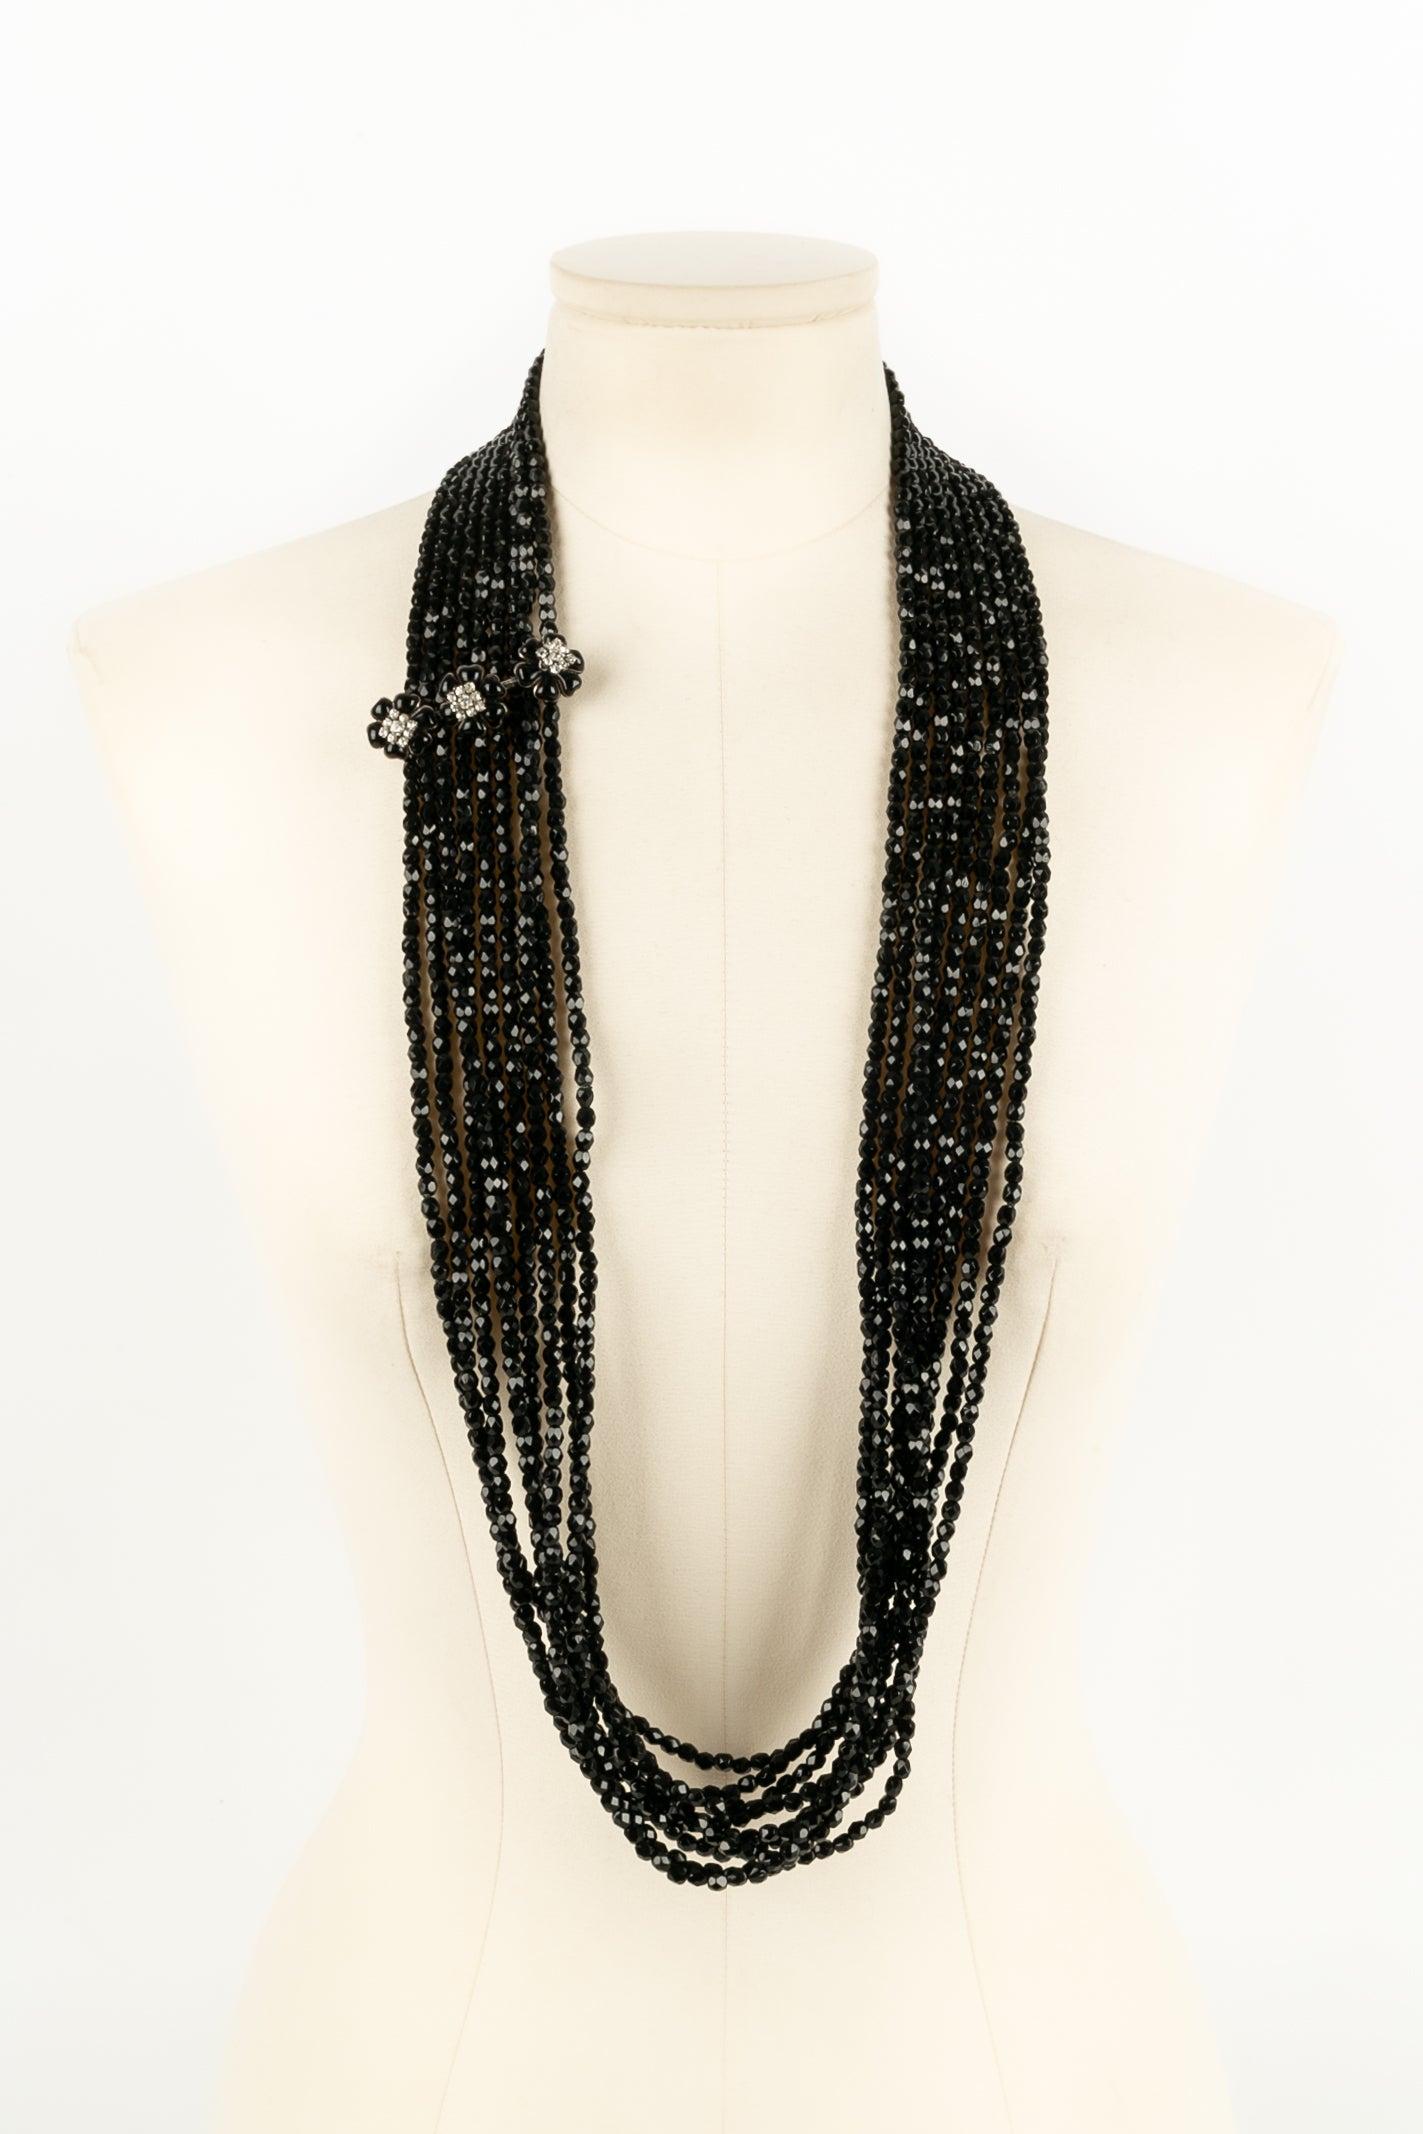 Chanel - (Made in France) Long multi-row necklace made of black glass beads and three camellias in glass paste. Fall-Winter 1995 collection.

Additional information: 
Dimensions: Length : 98 cm
Condition: Very good condition
Seller Ref number: CB115